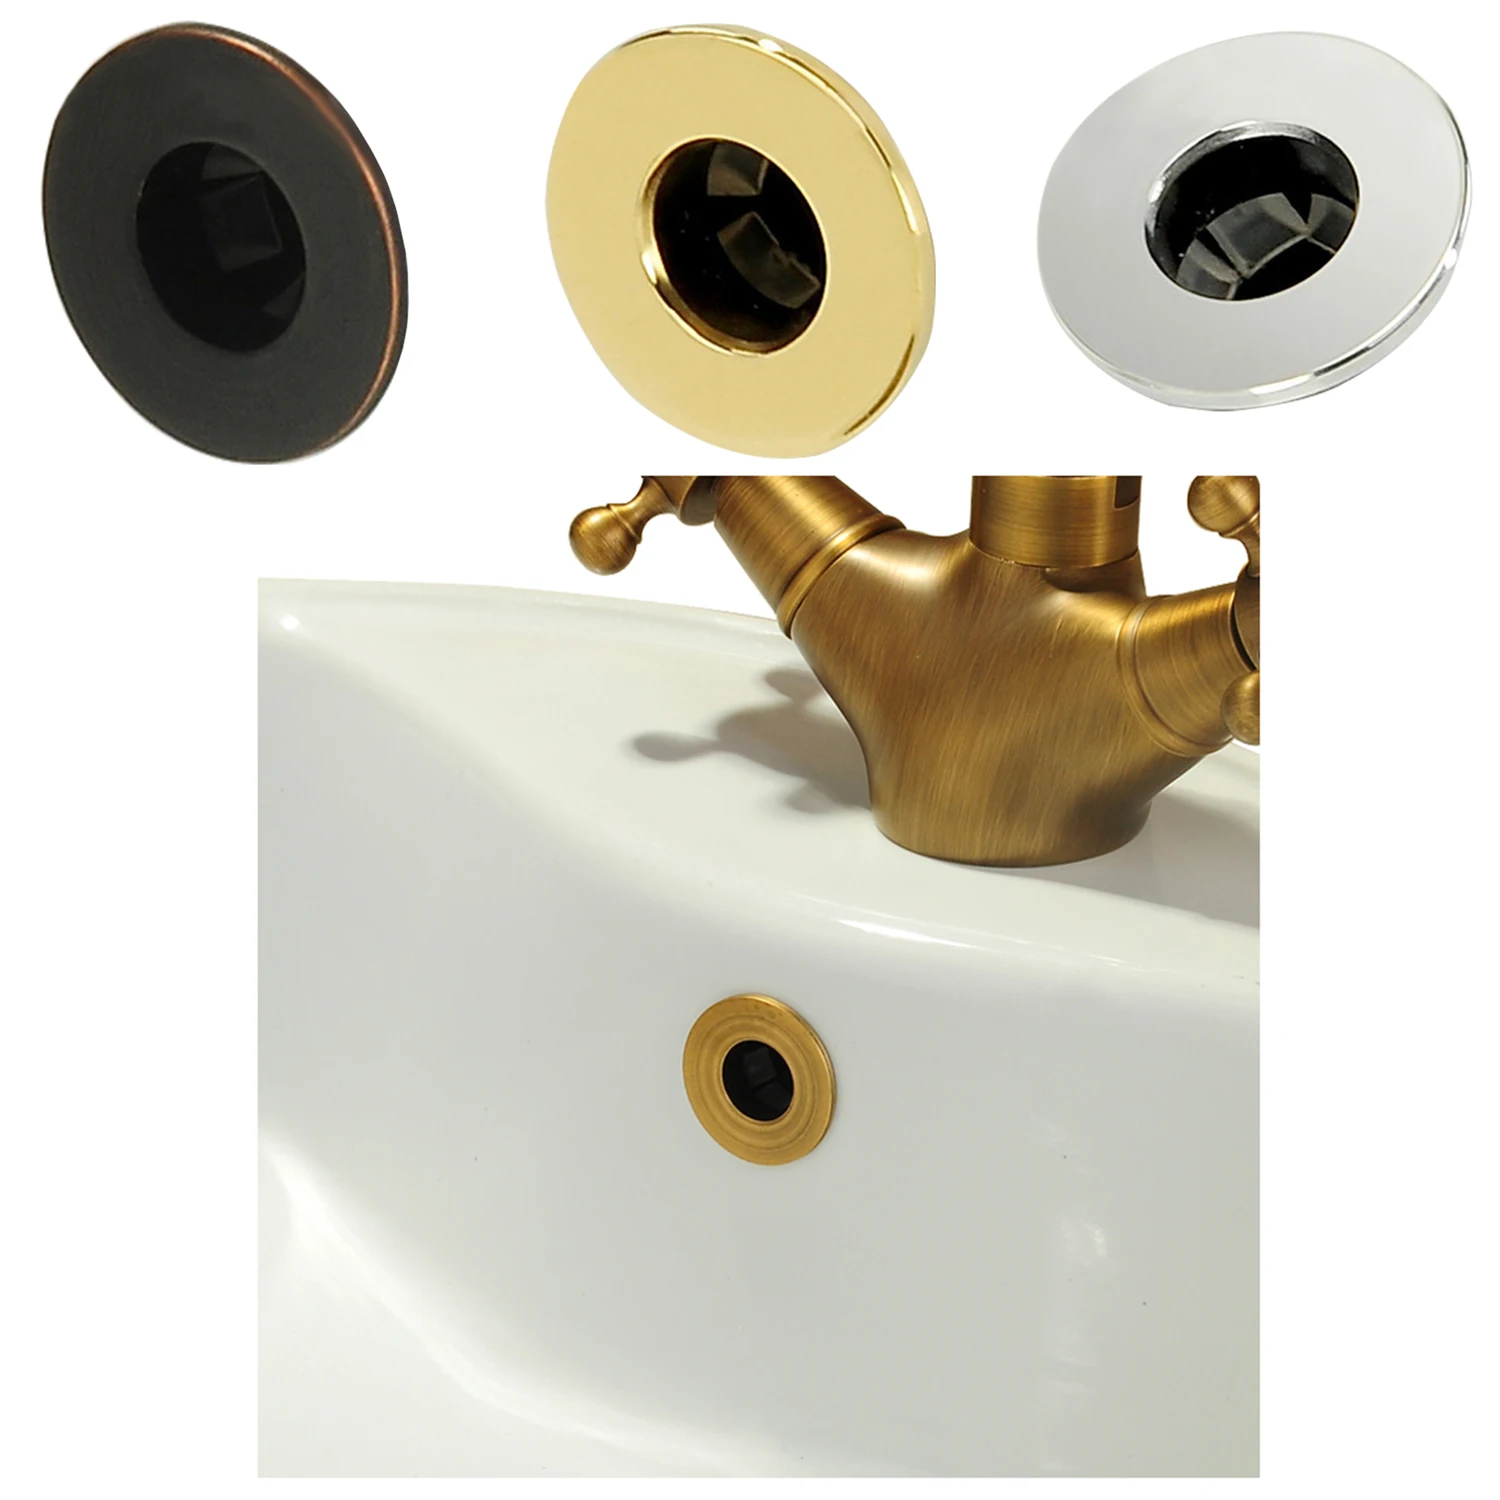 

New design Bathroom Basin / Sink Overflow Cover/Brass Six-foot ring Bathroom Product Basin Tidy Insert Replacement WF-0567 (Brig